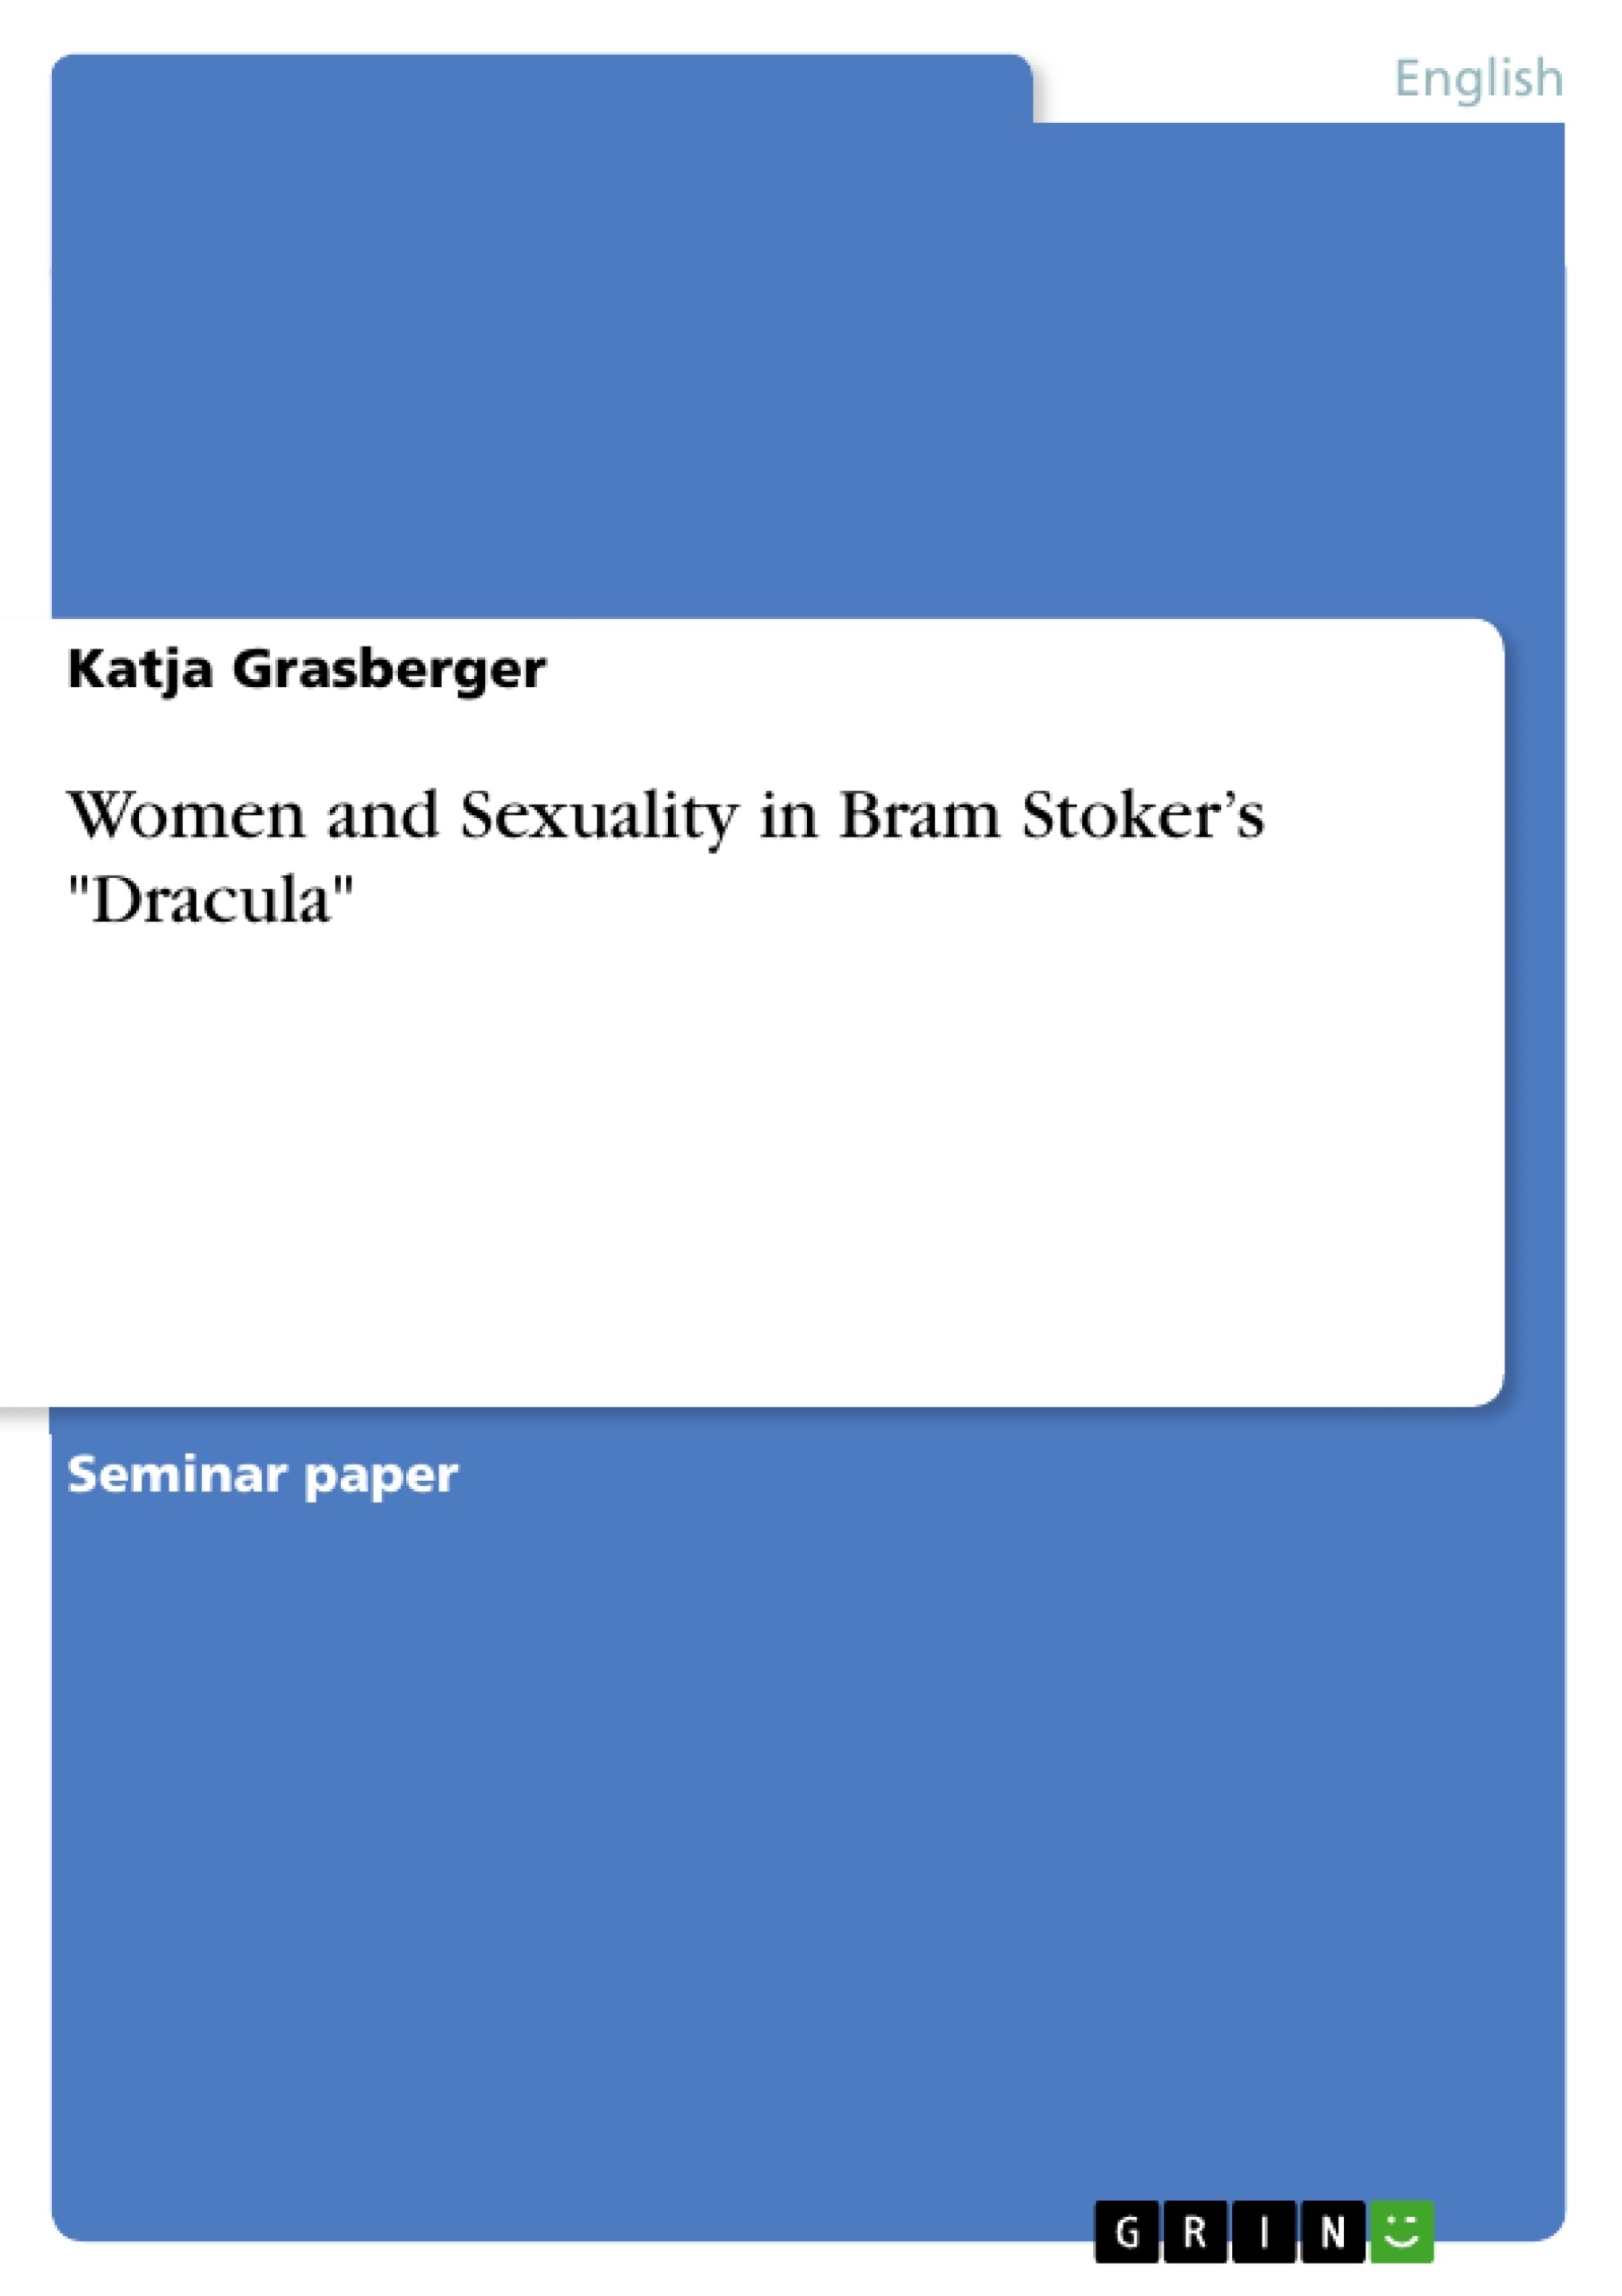 Titre: Women and Sexuality in Bram Stoker’s "Dracula"